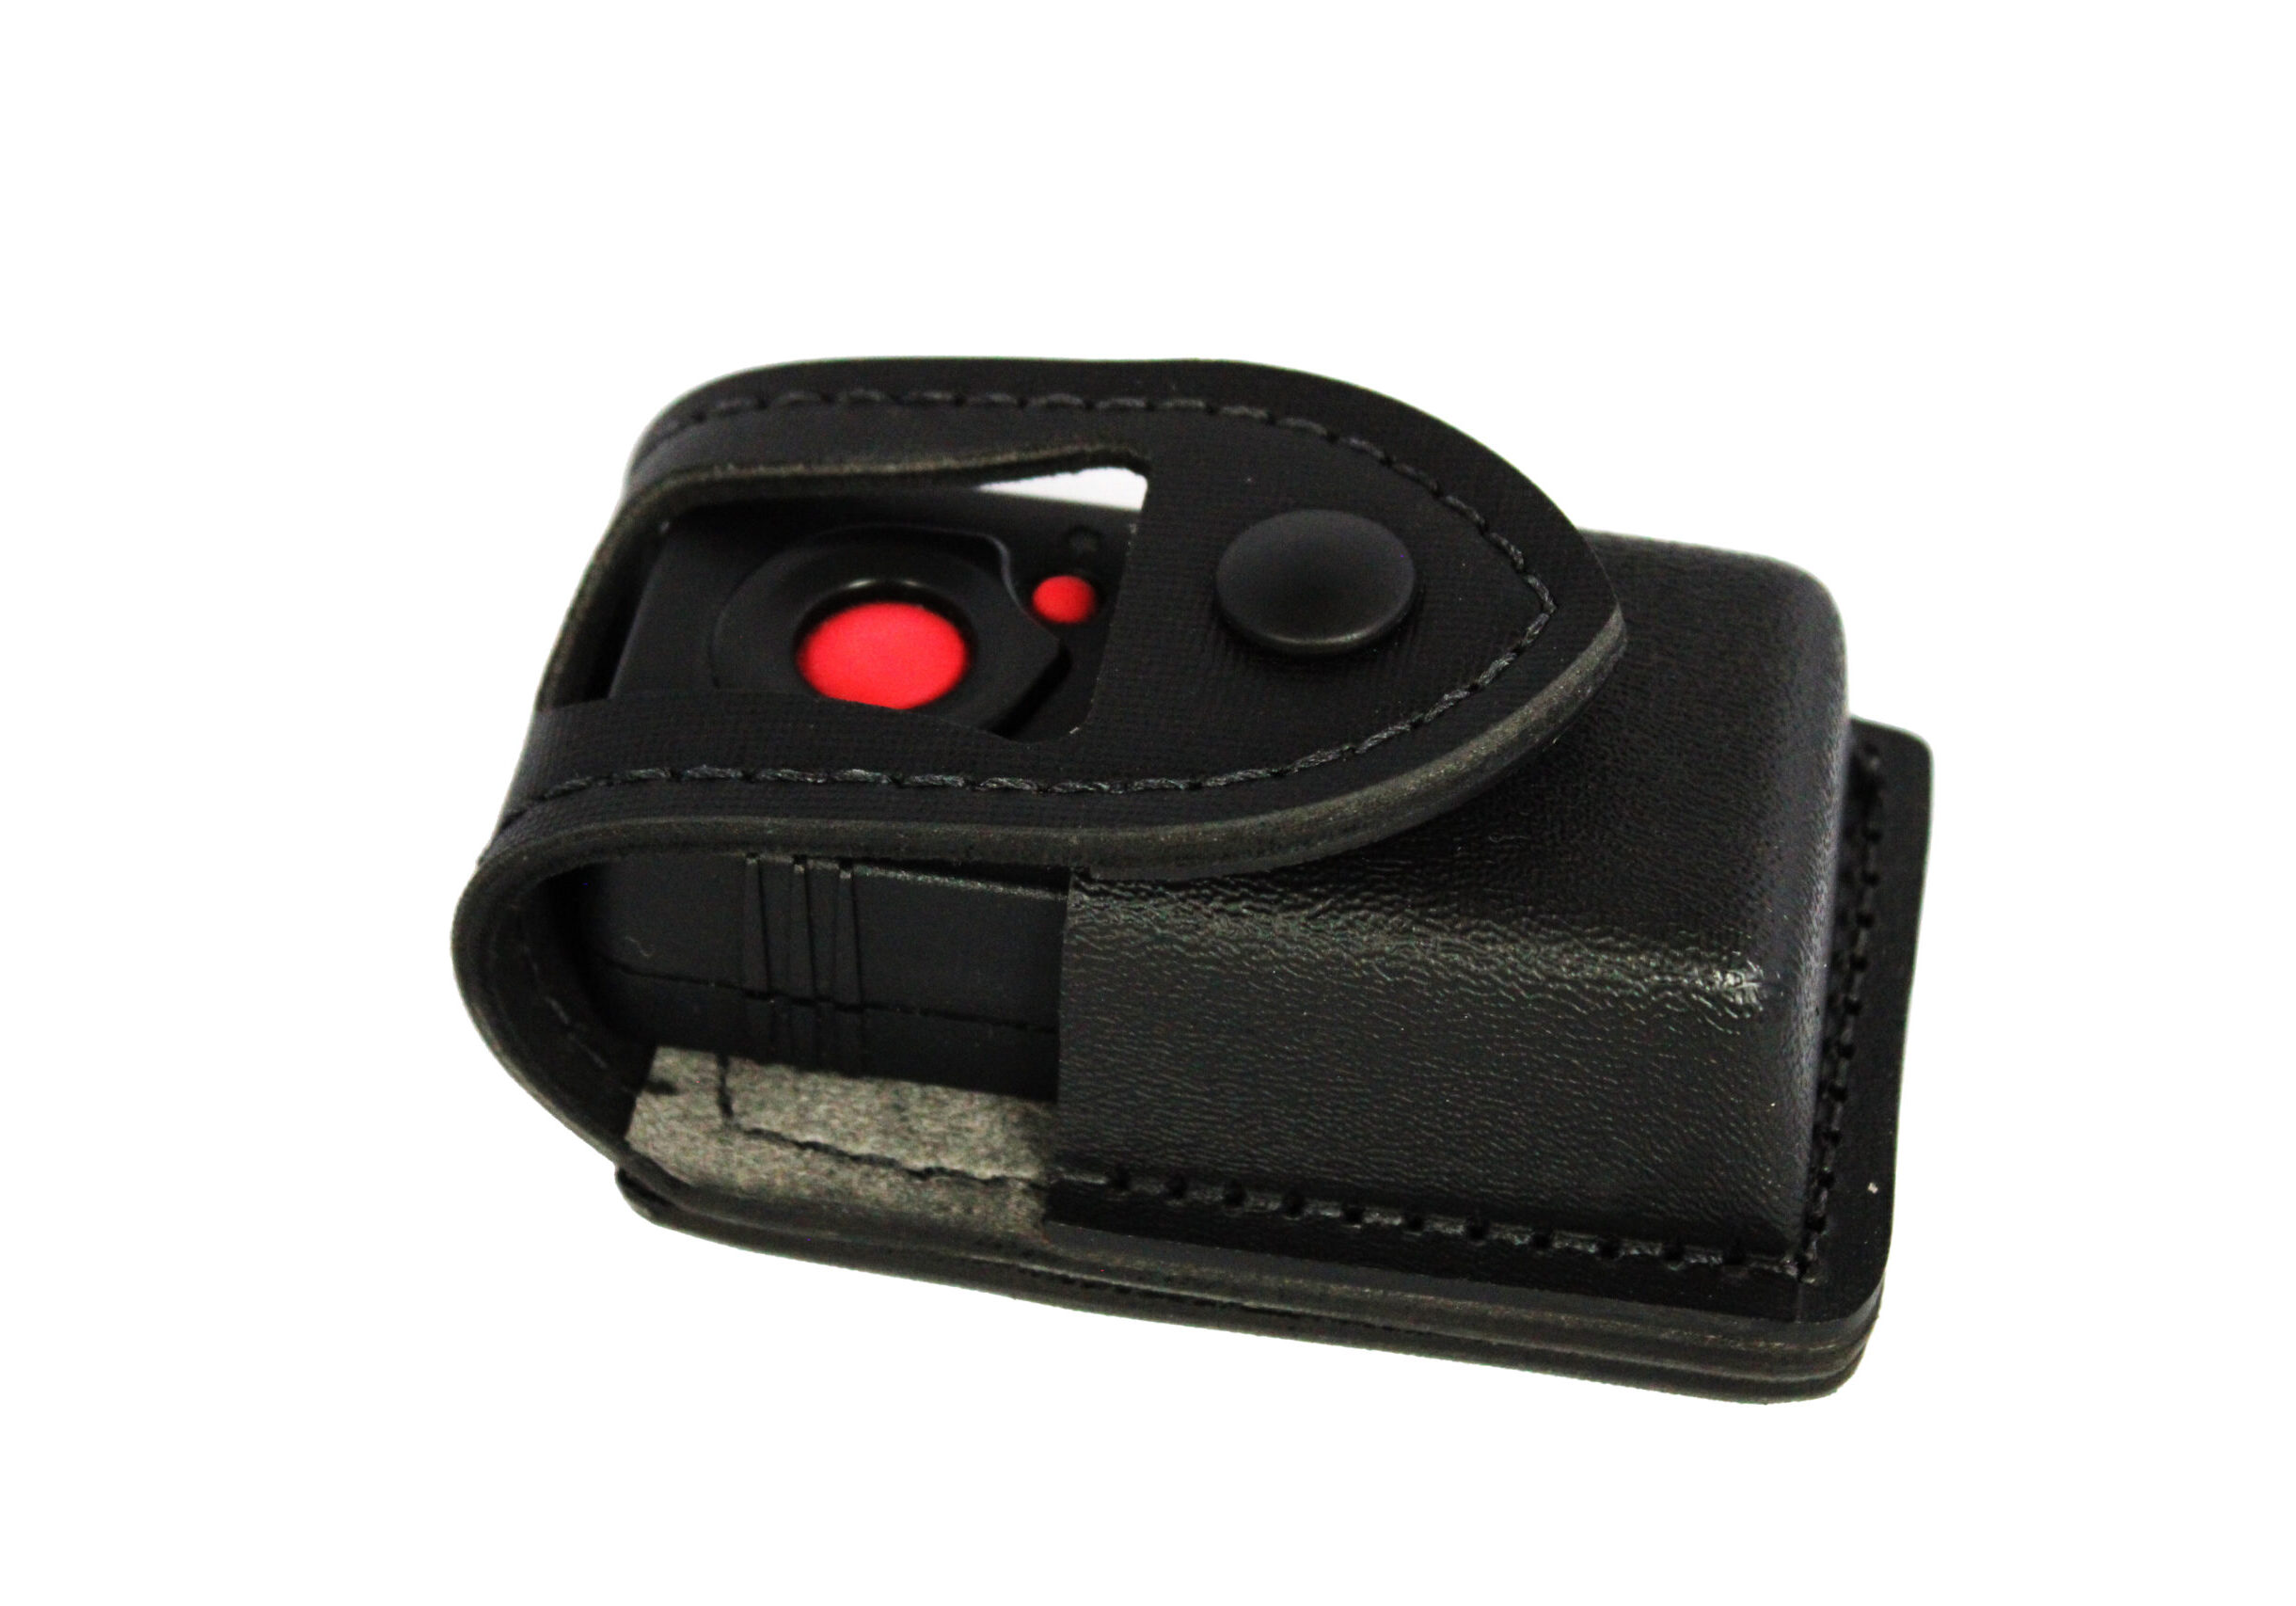 Duress Device in holster